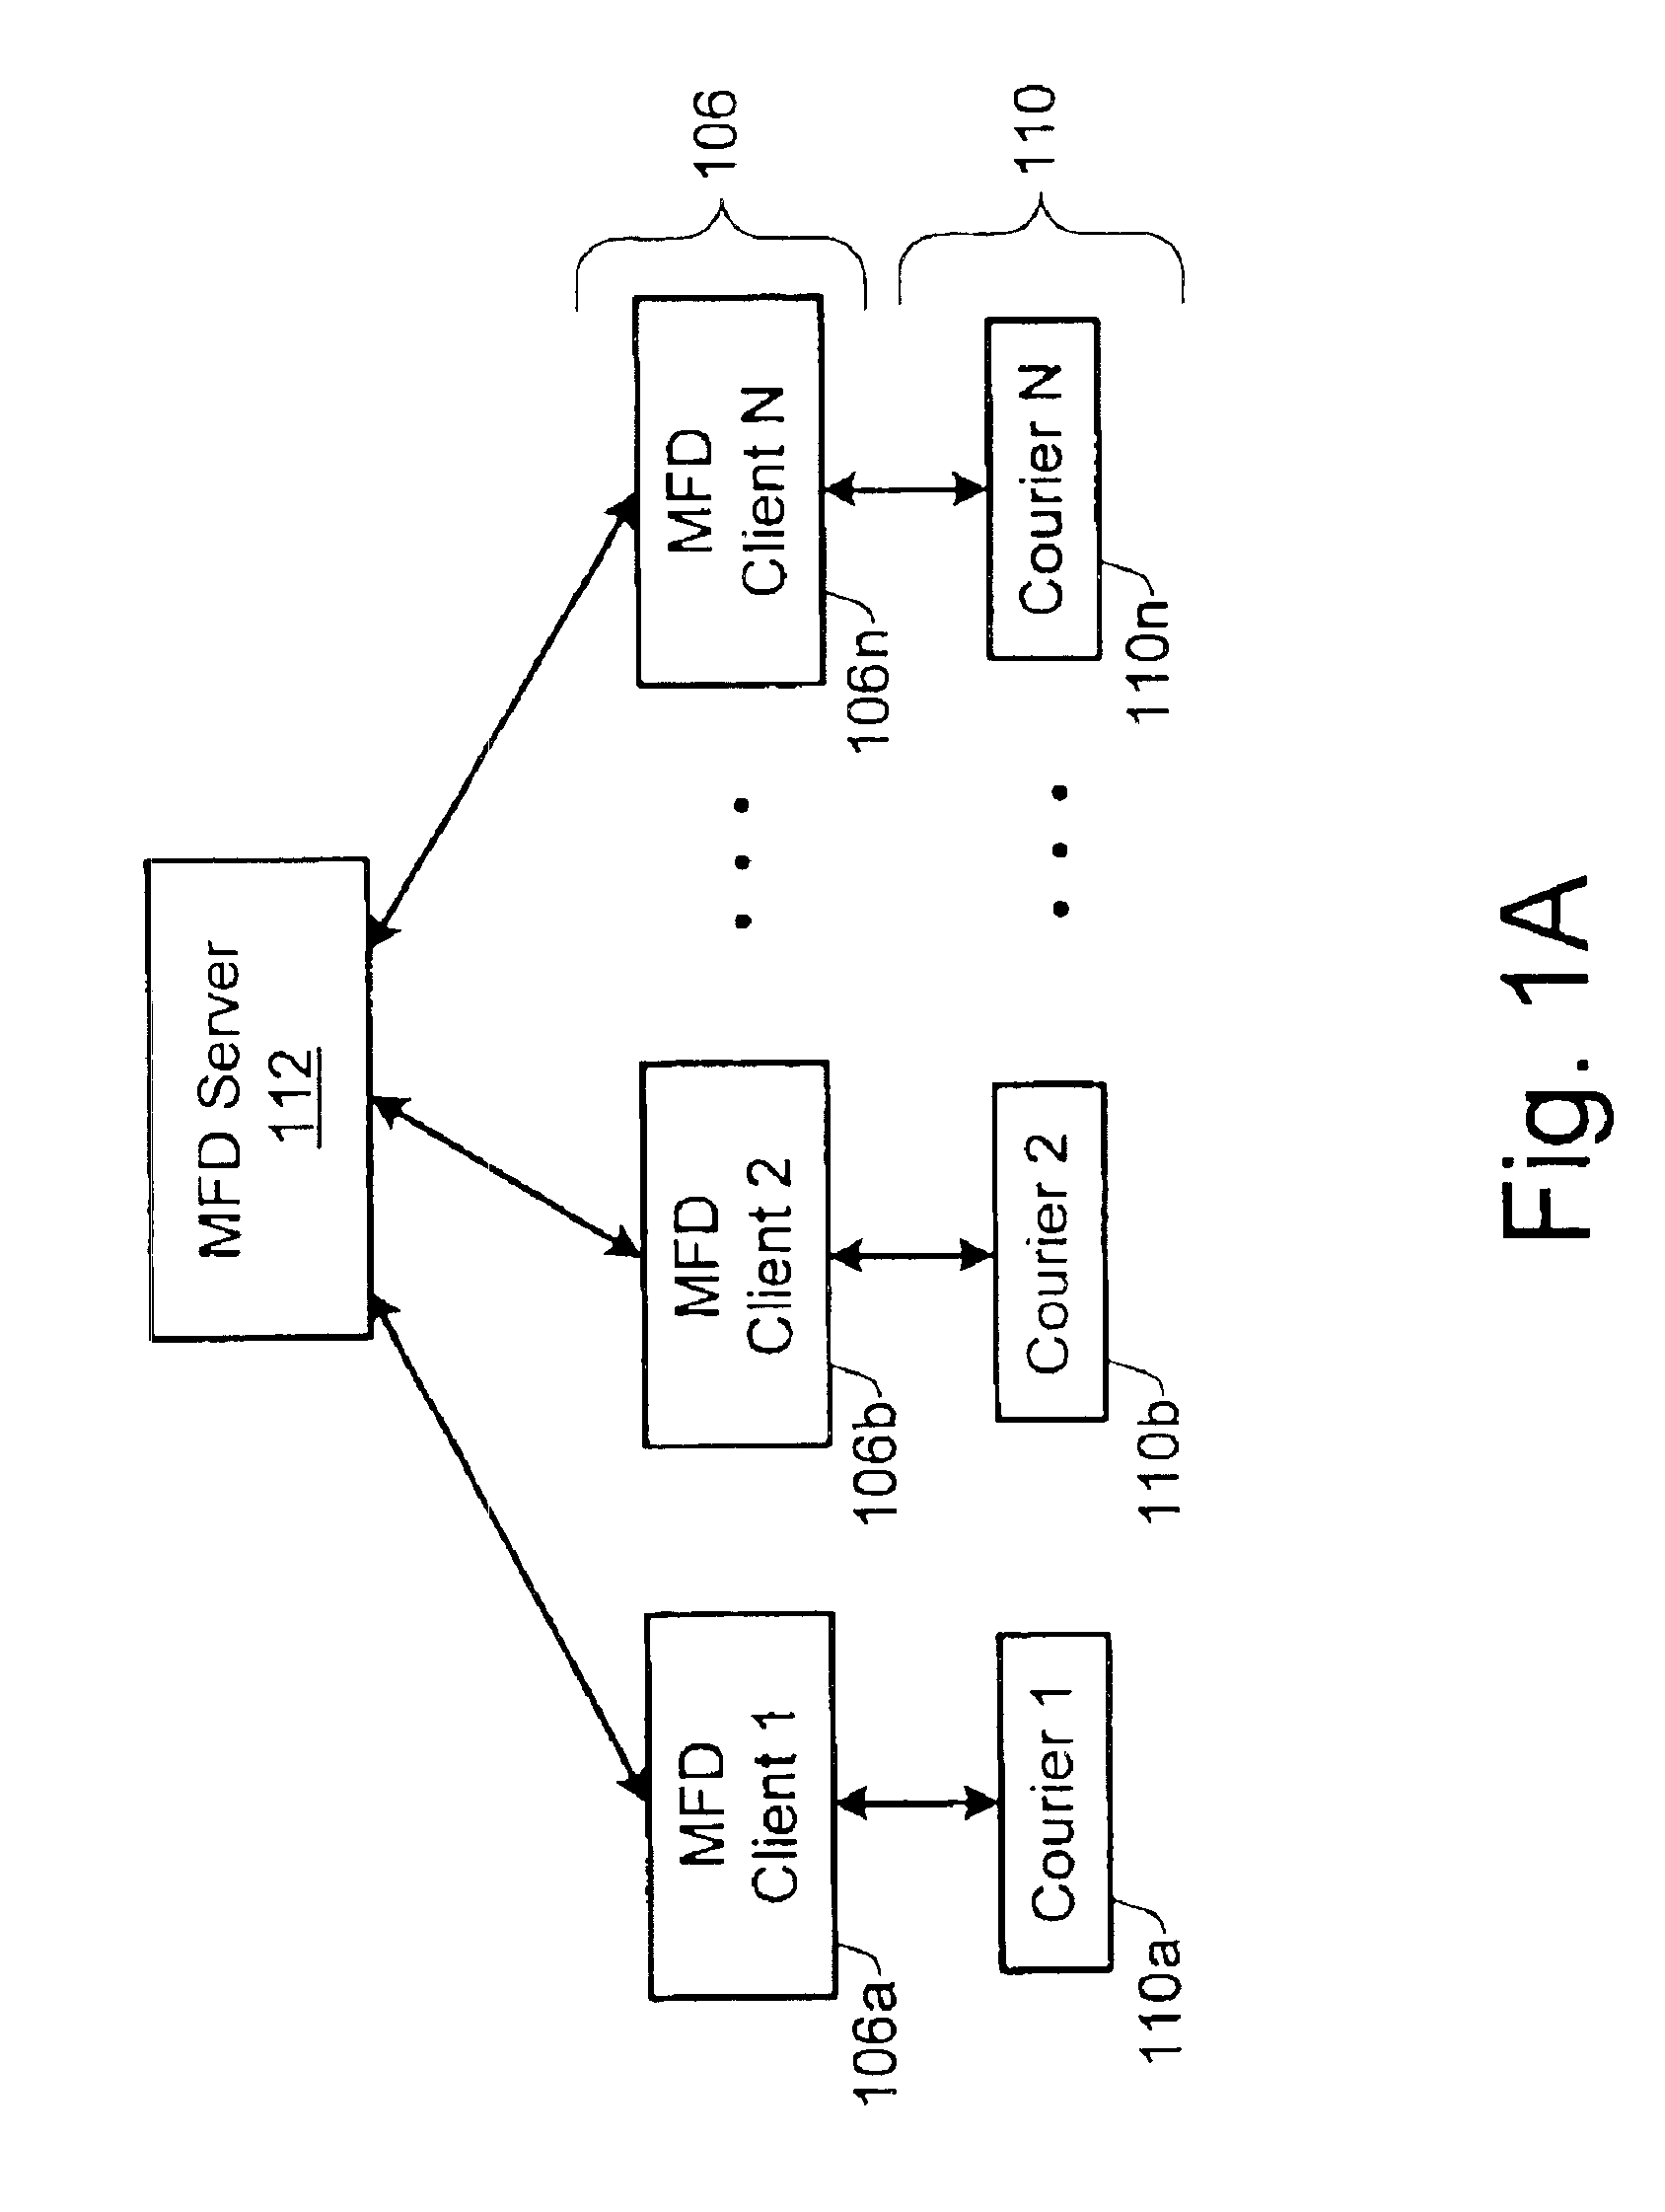 Technique for processing customer service transactions at customer site using mobile computing device